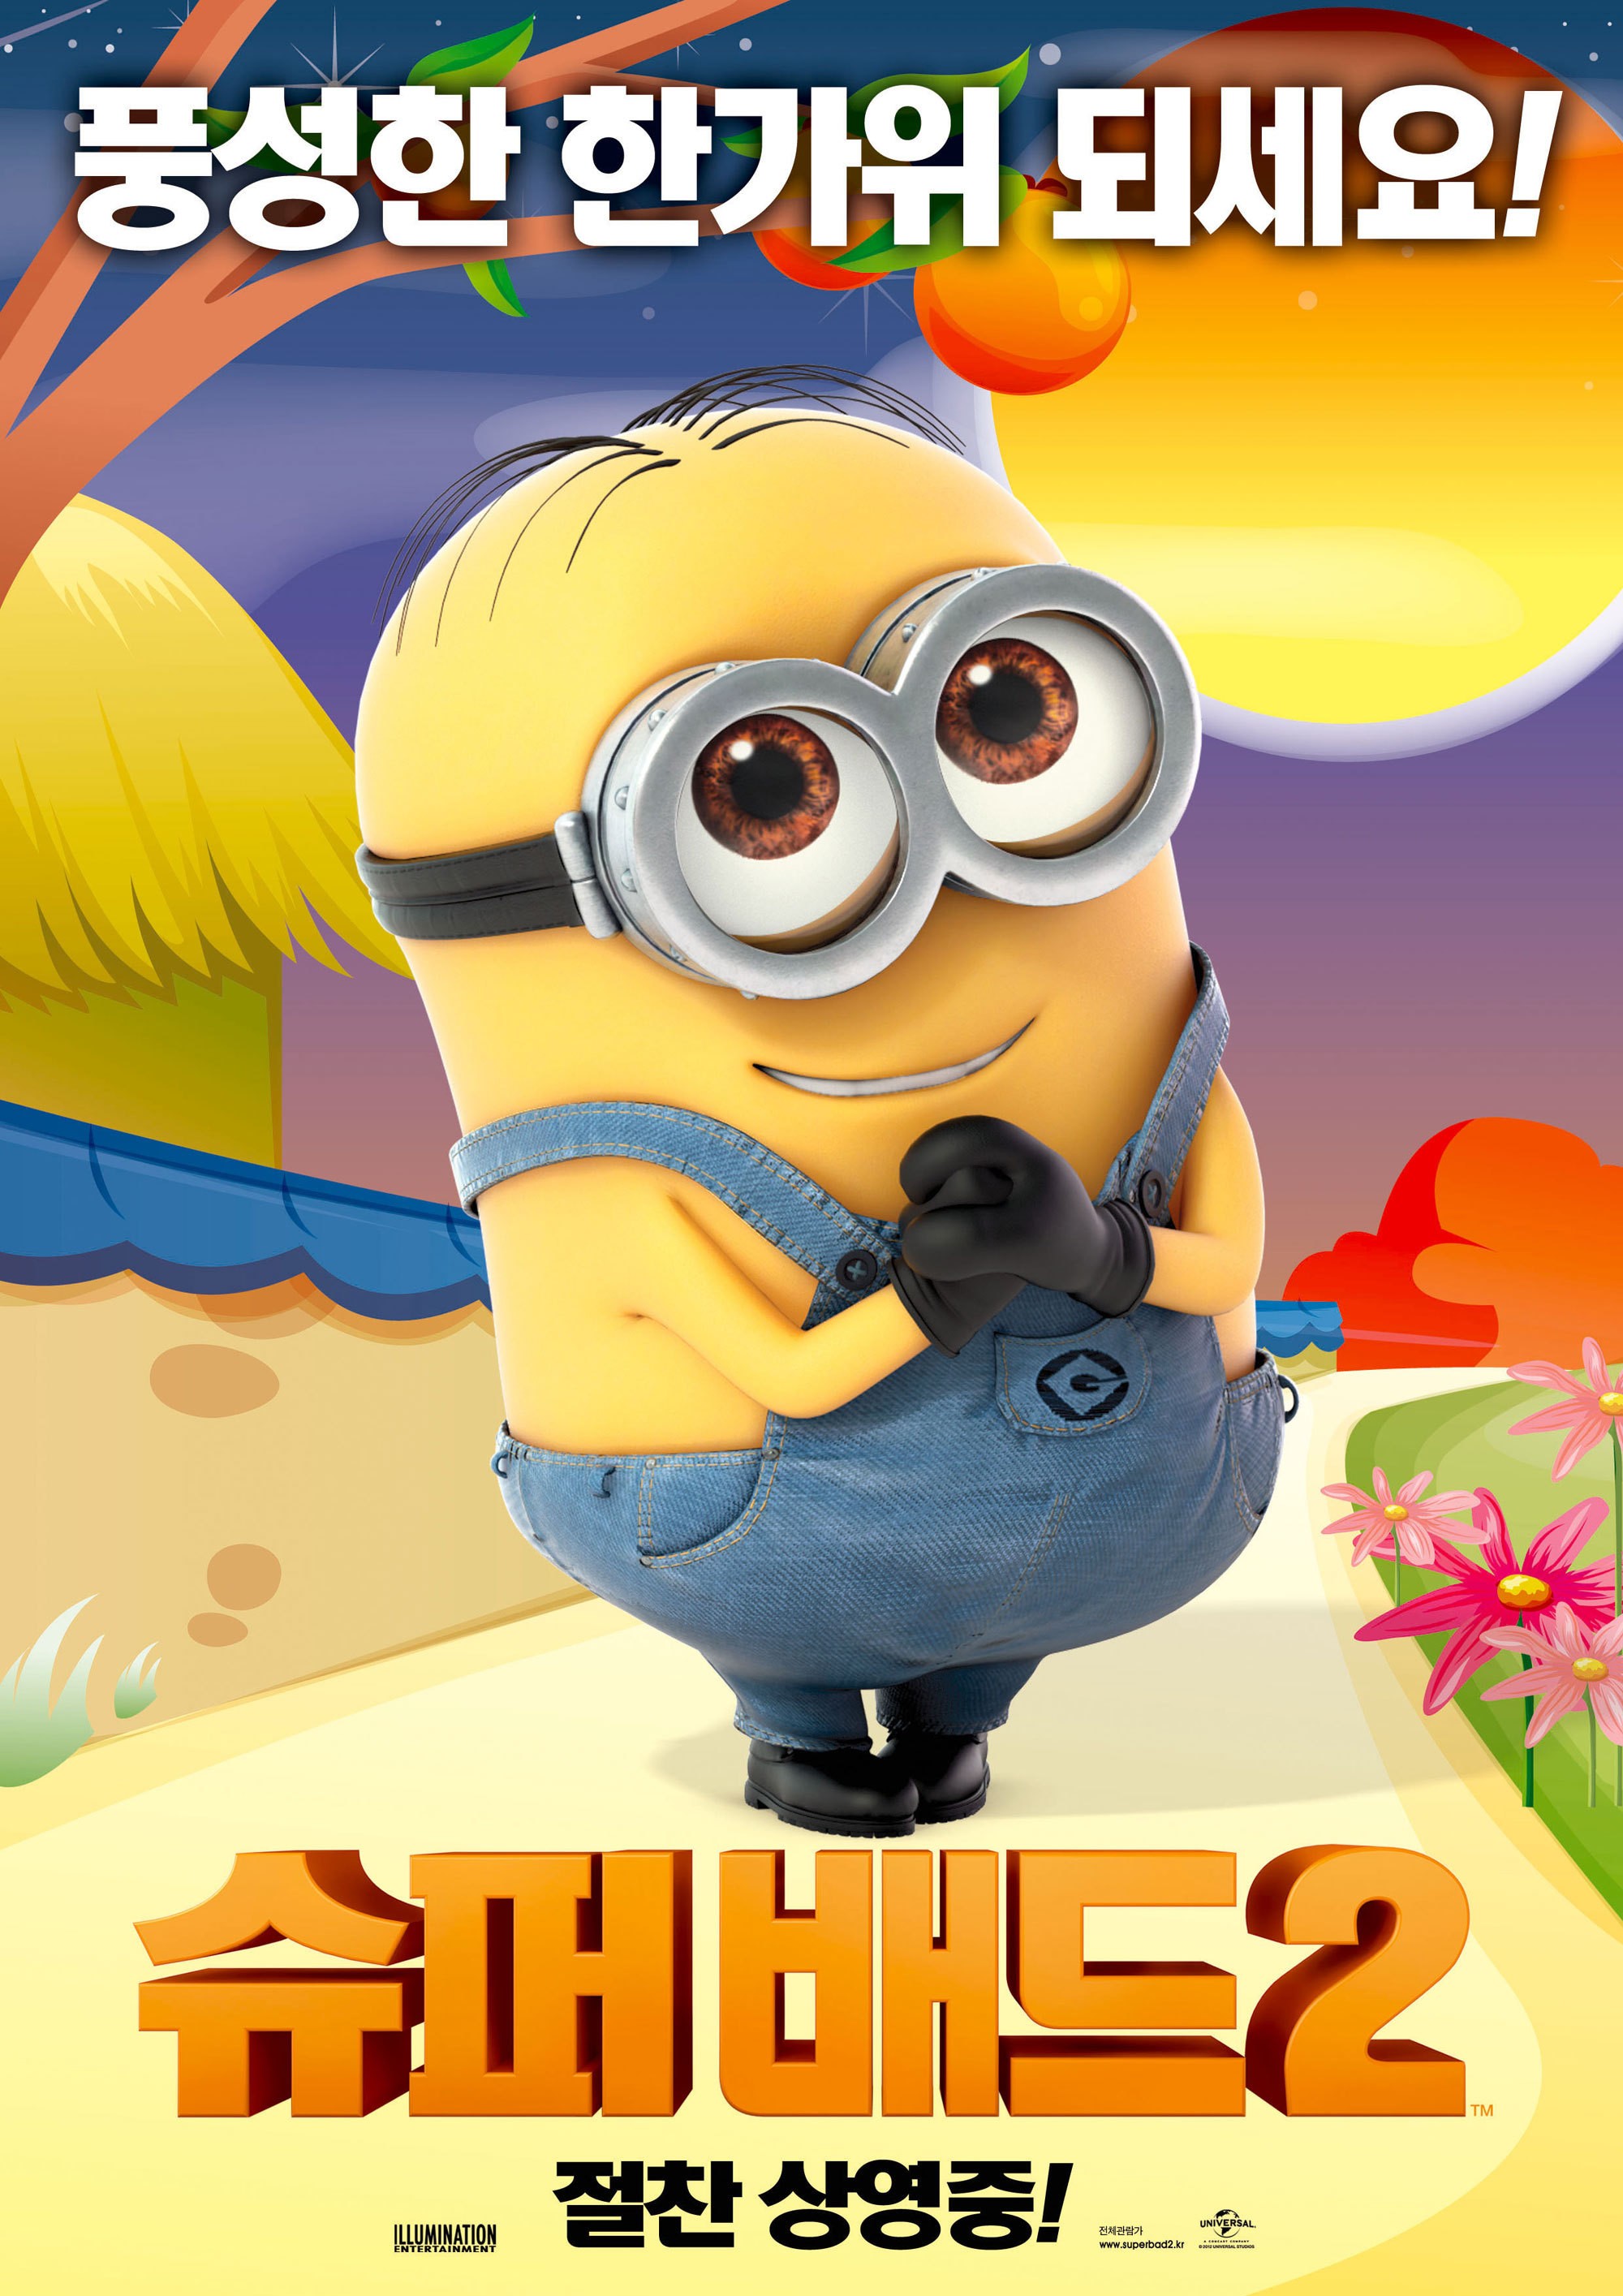 Mega Sized Movie Poster Image for Despicable Me 2 (#28 of 28)